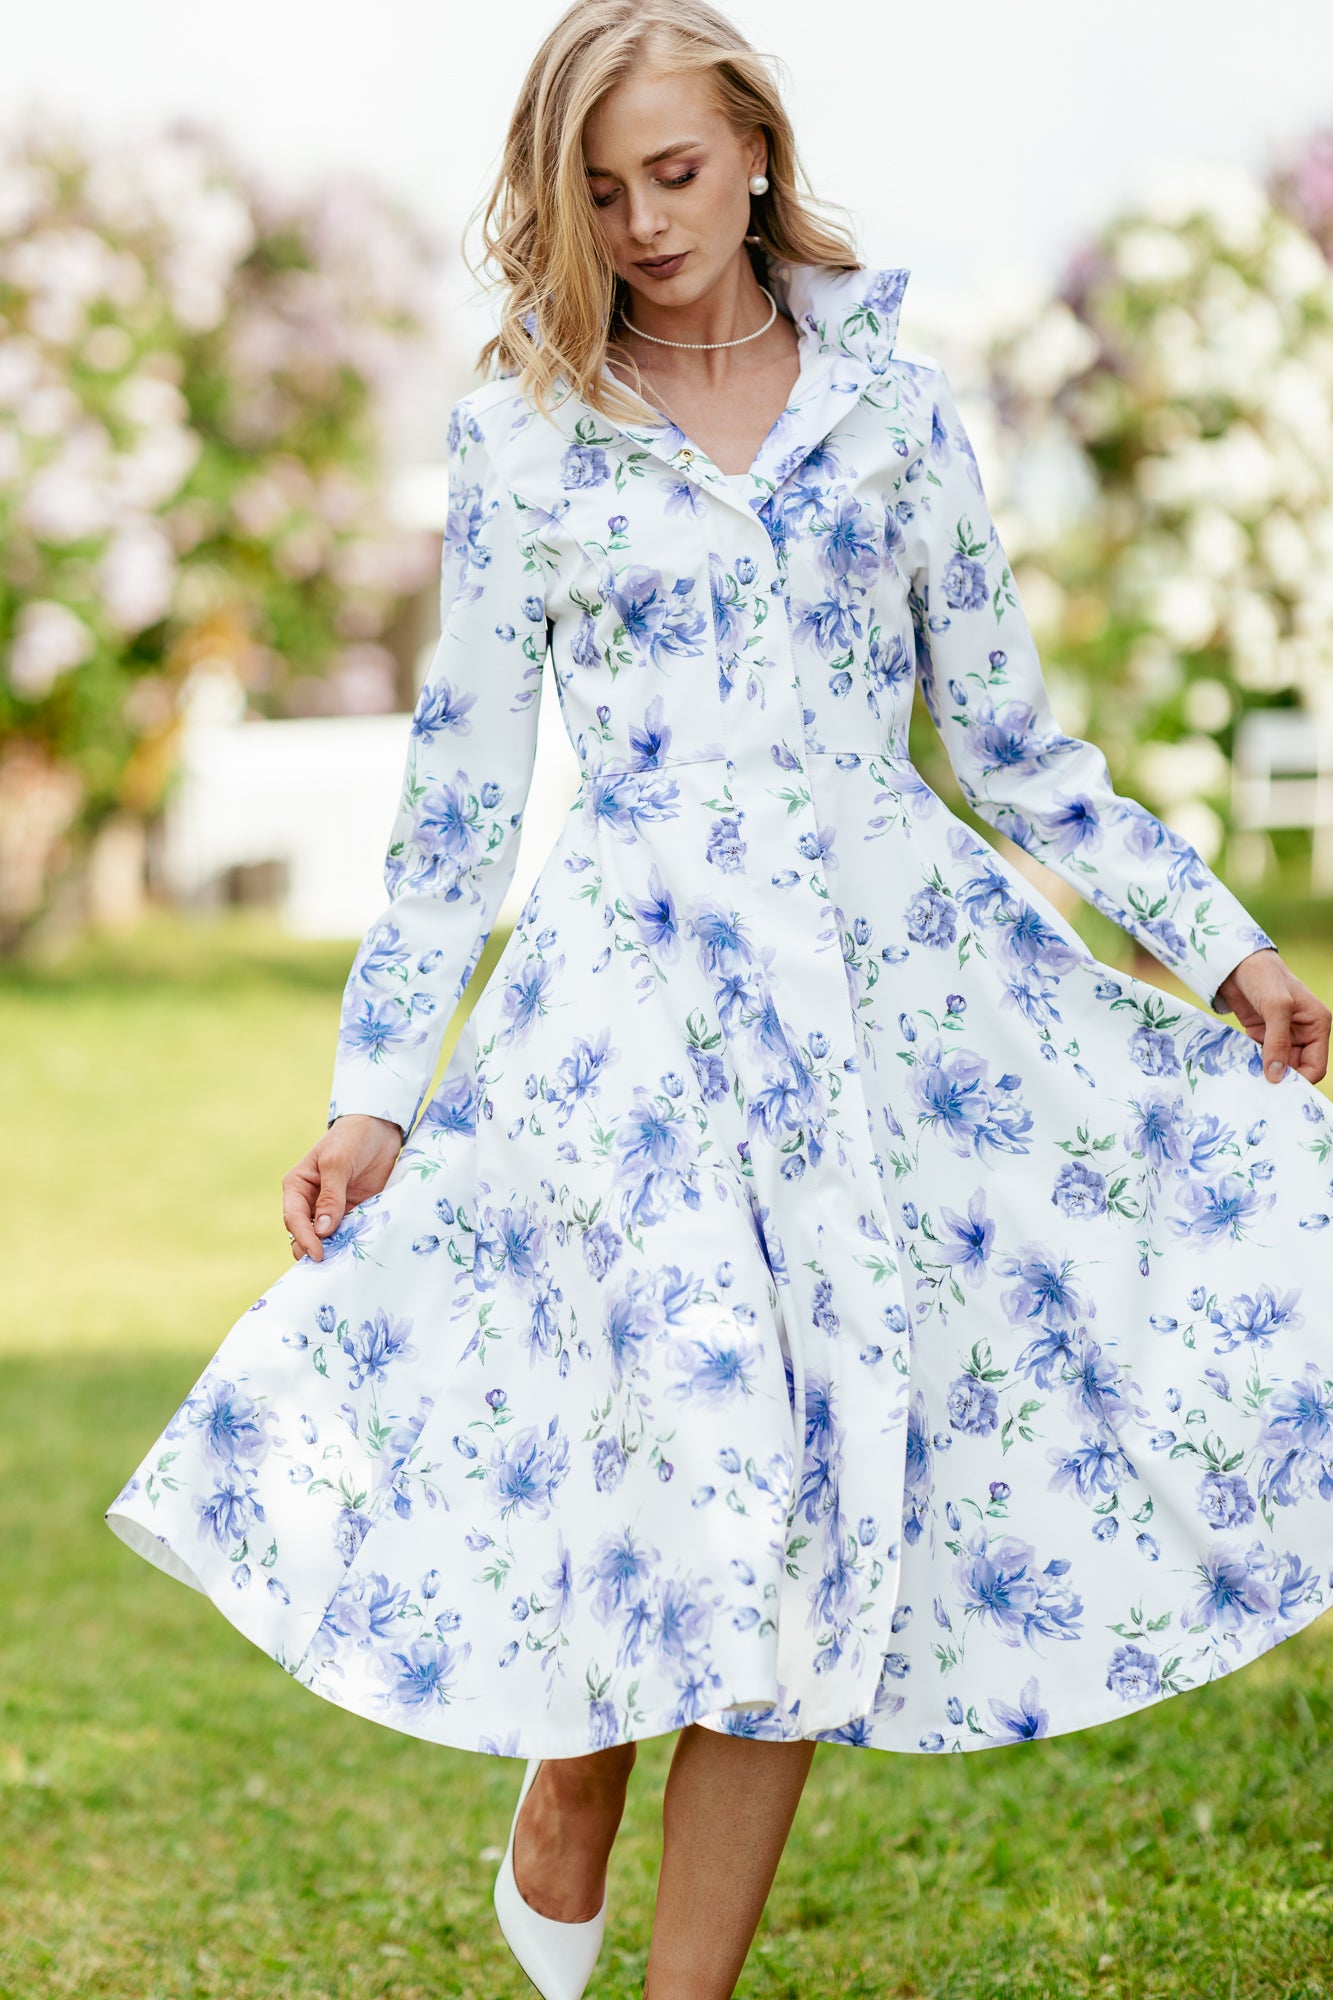 Fitted and flared coat with A-line skirt in white with blue flower print